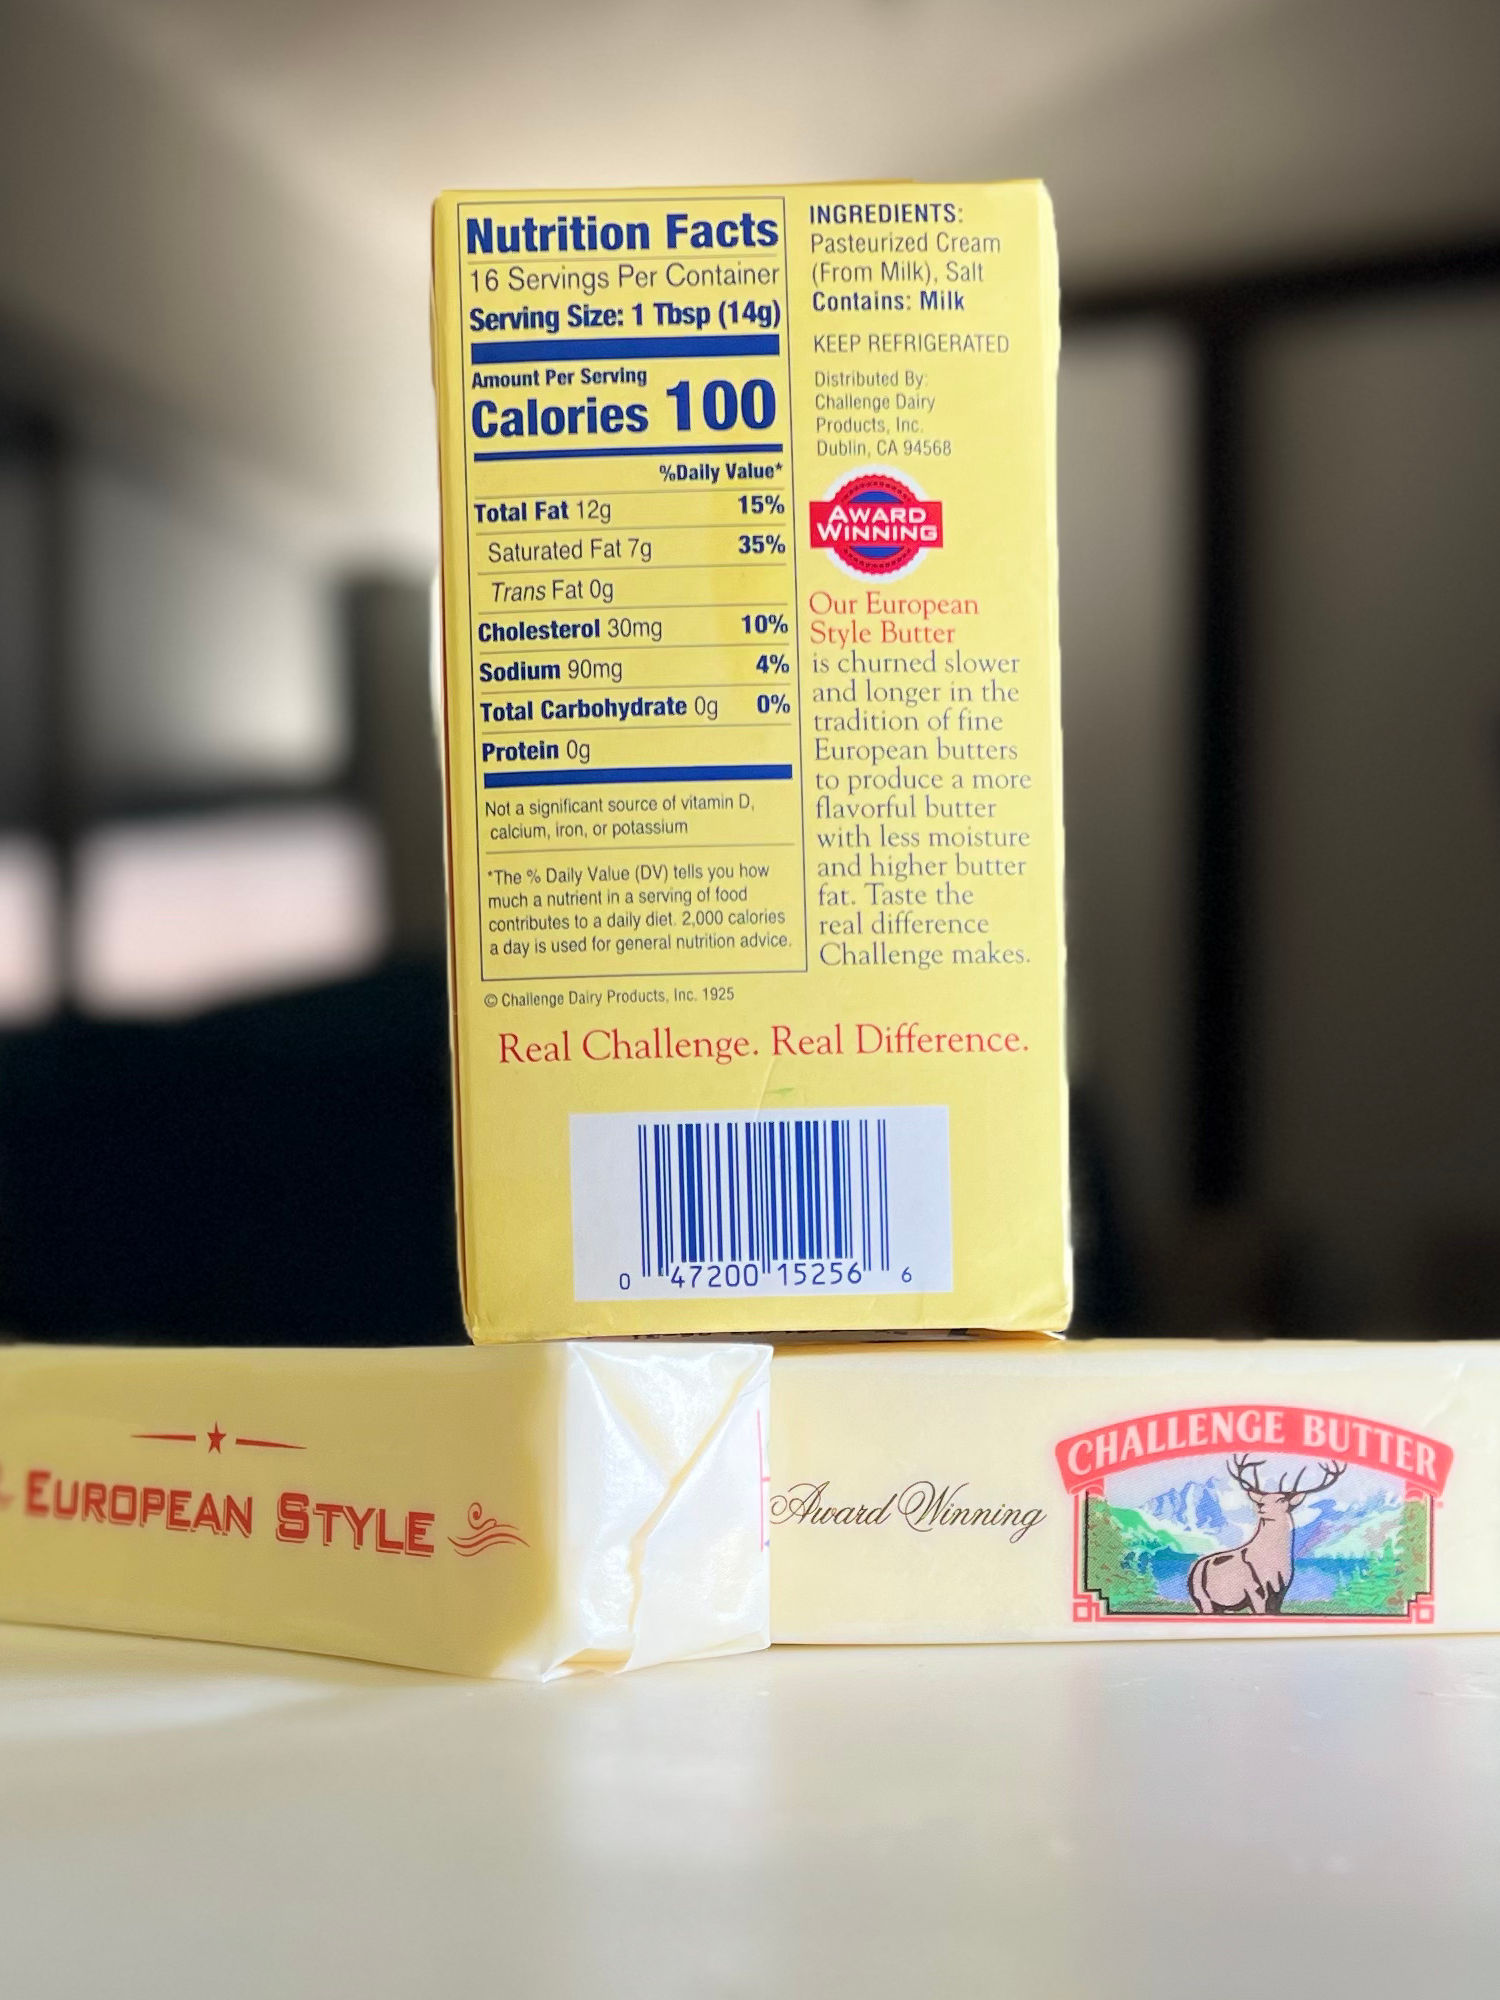 Challenge Butter European Style Nutrition Facts